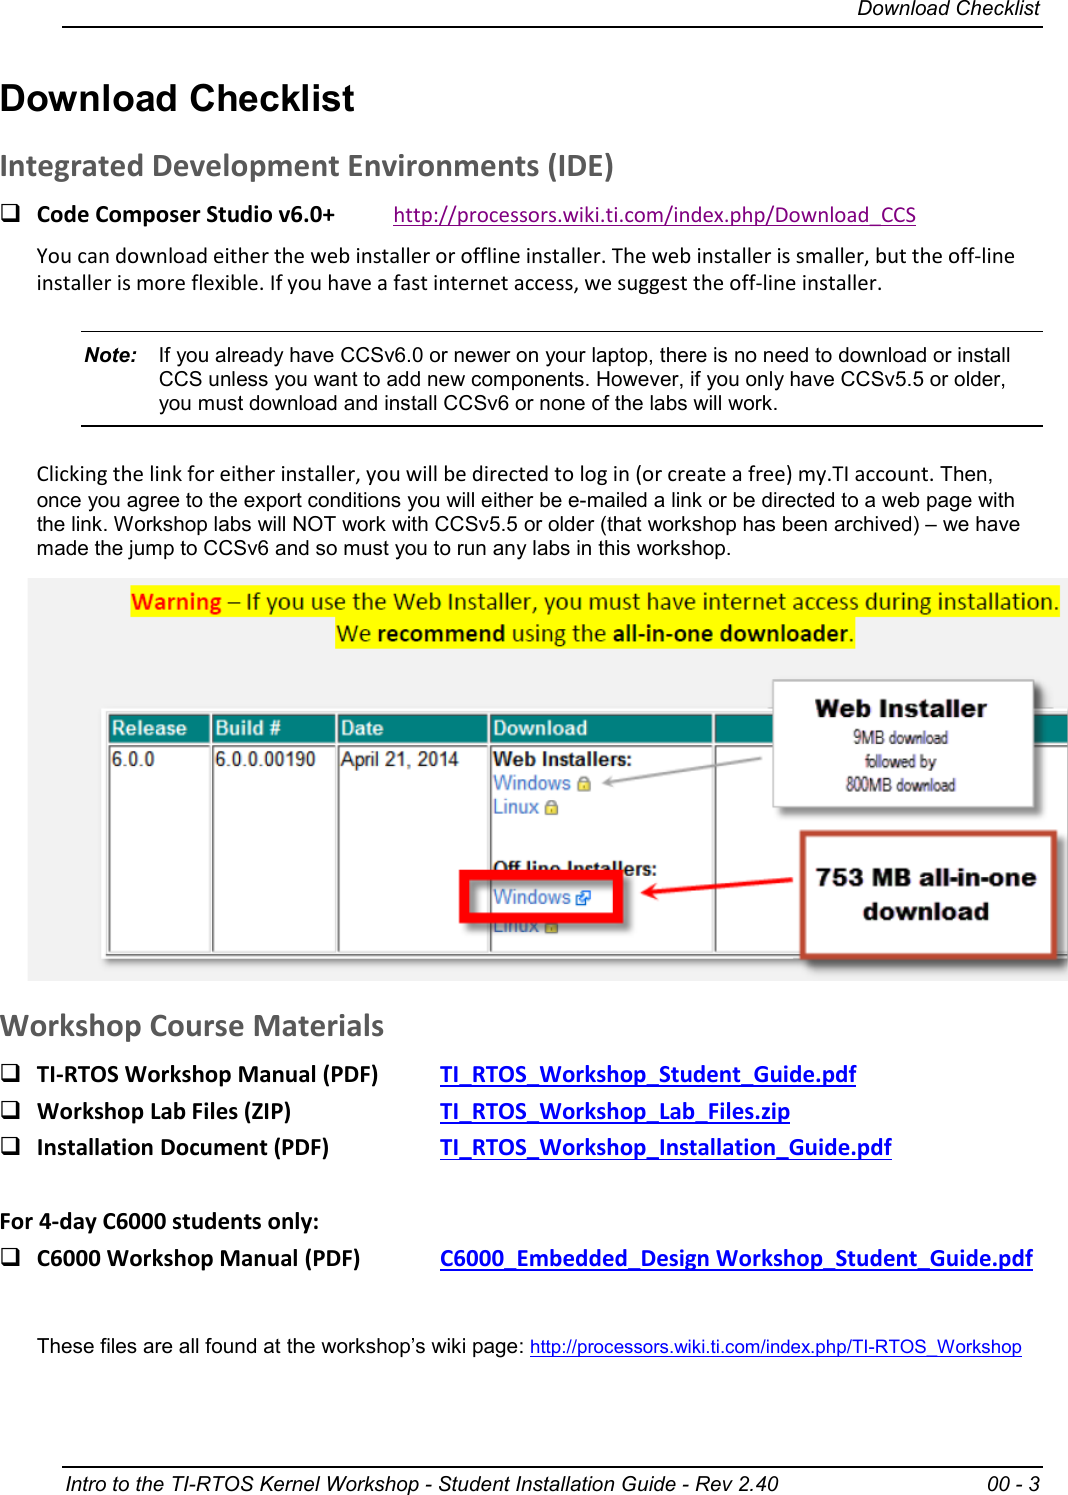 Page 3 of 12 - Student Installation Guide - Rev 2.40 TI RTOS Workshop Rev2.40